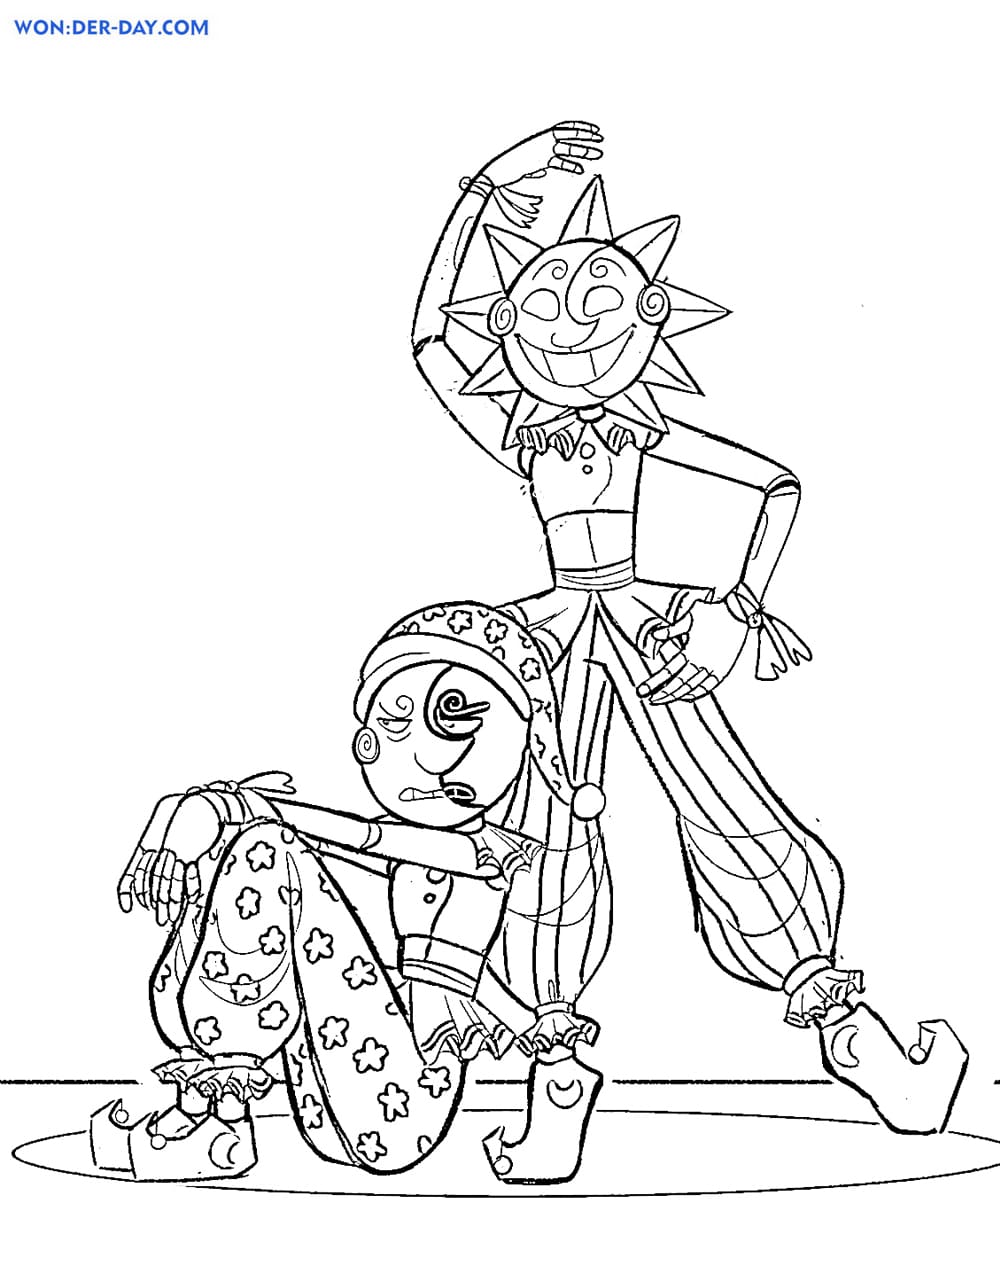 Sundrop Fnaf Coloring Pages Wonder Day — Coloring Pages For Children